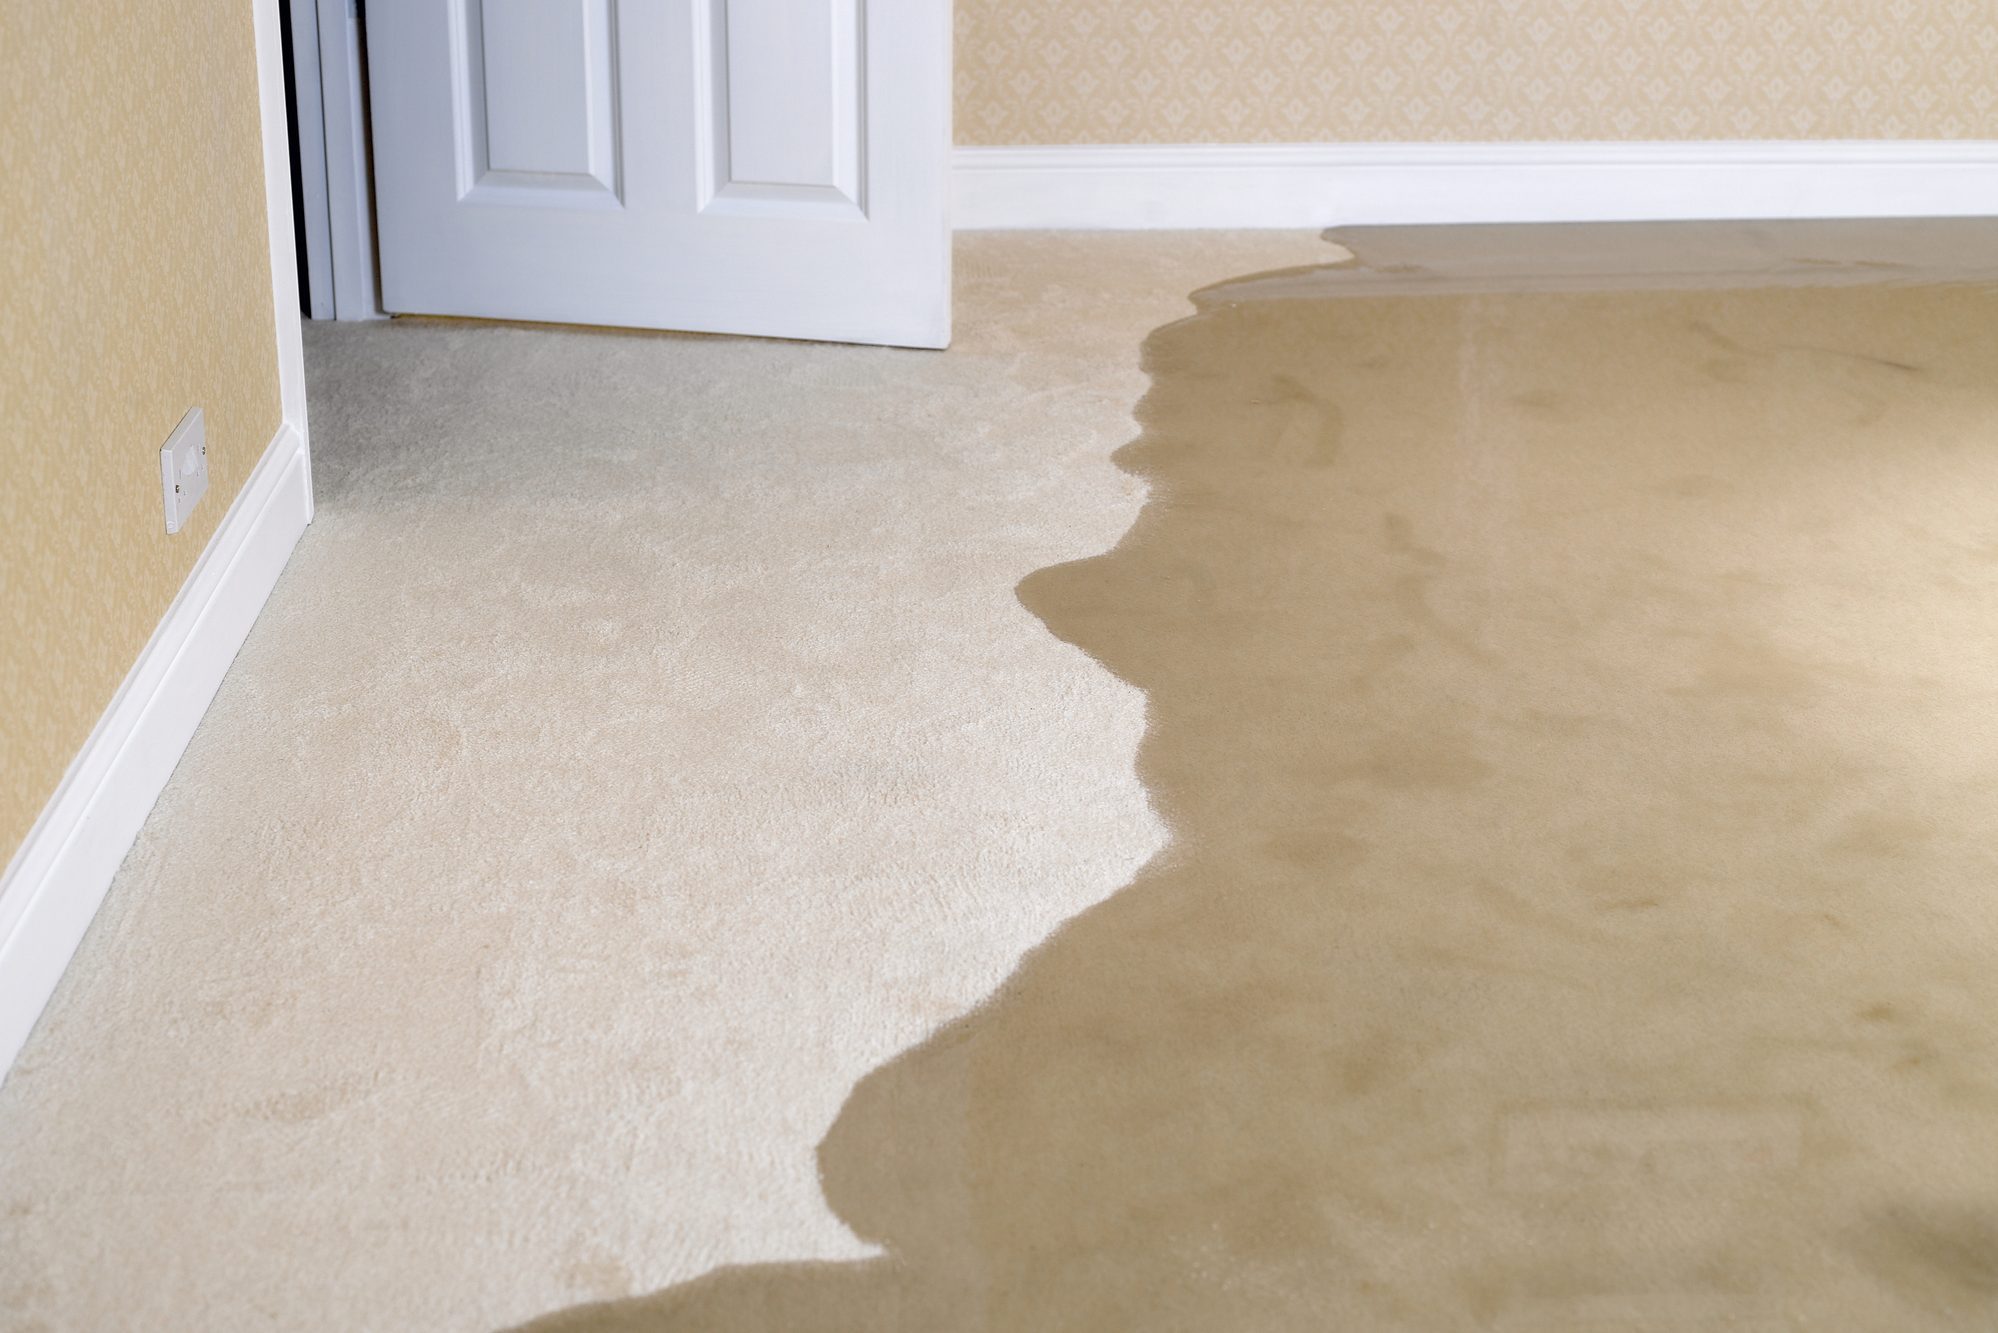 How to Tackle Mold After Water Damage